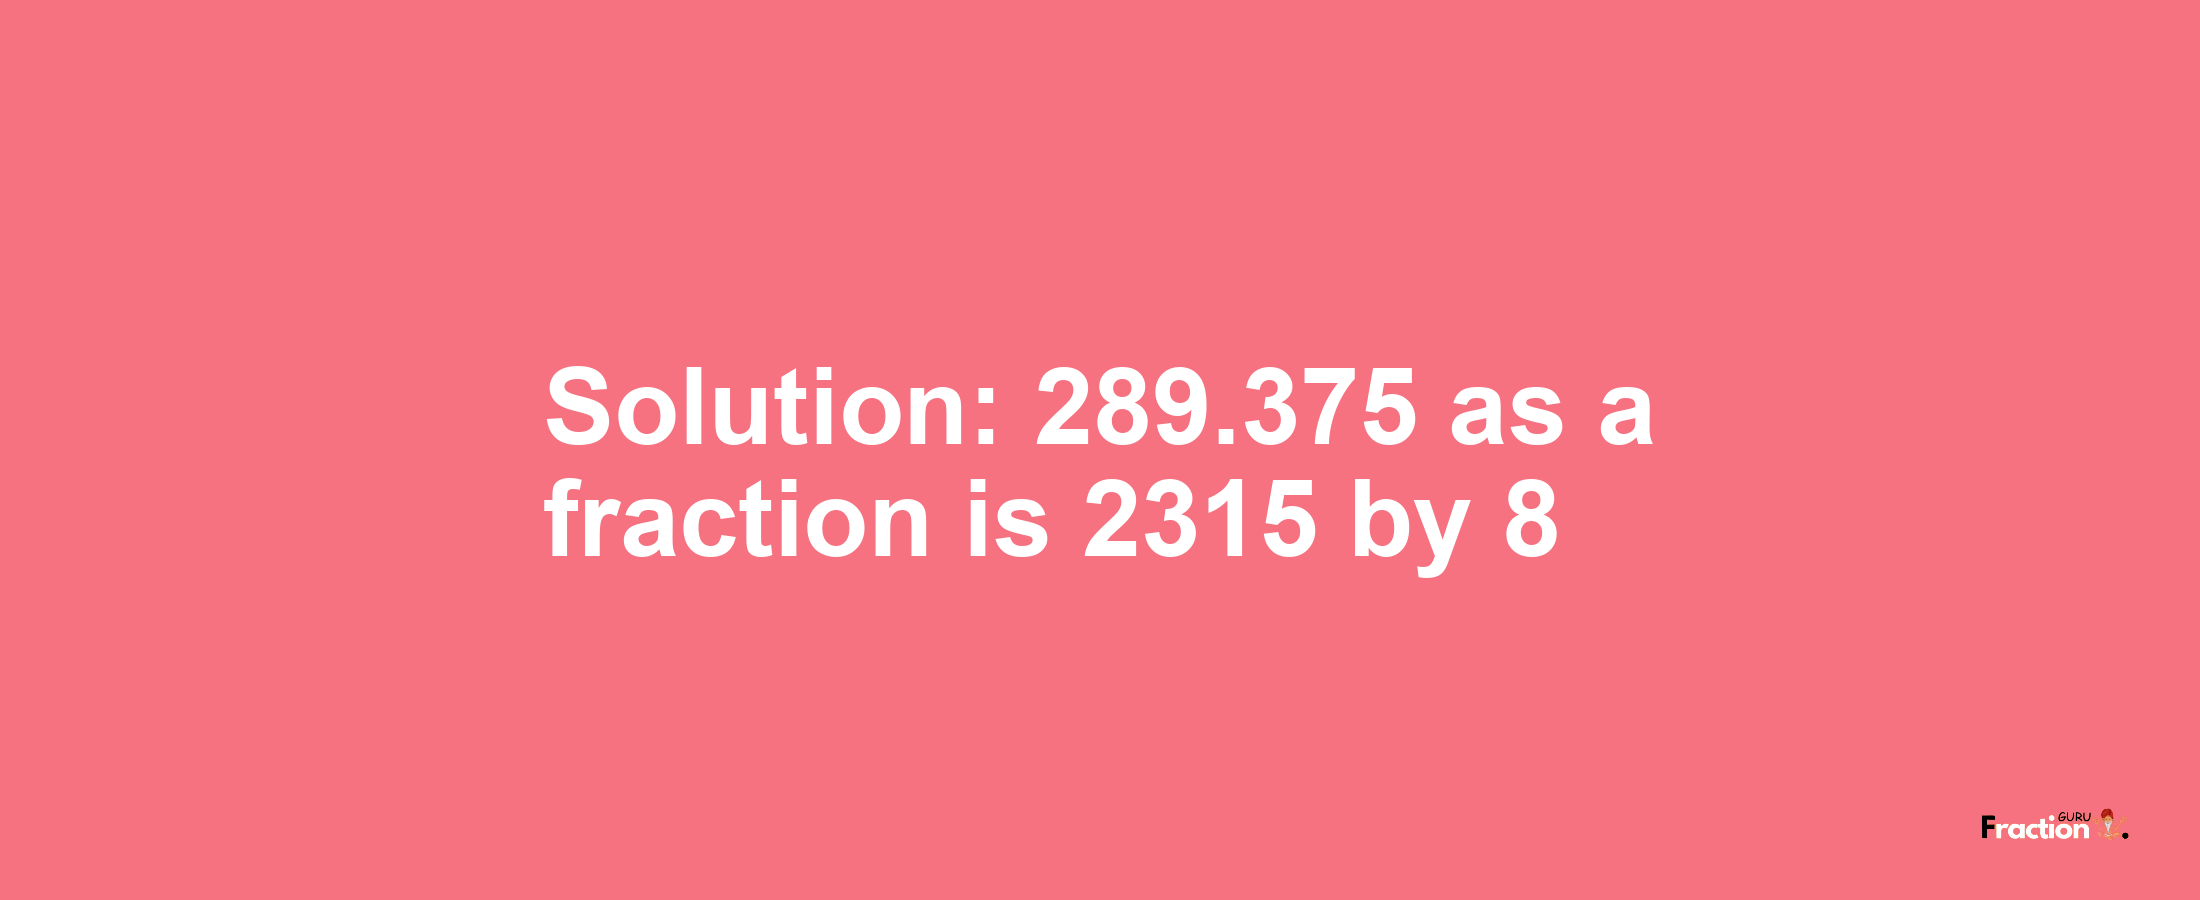 Solution:289.375 as a fraction is 2315/8